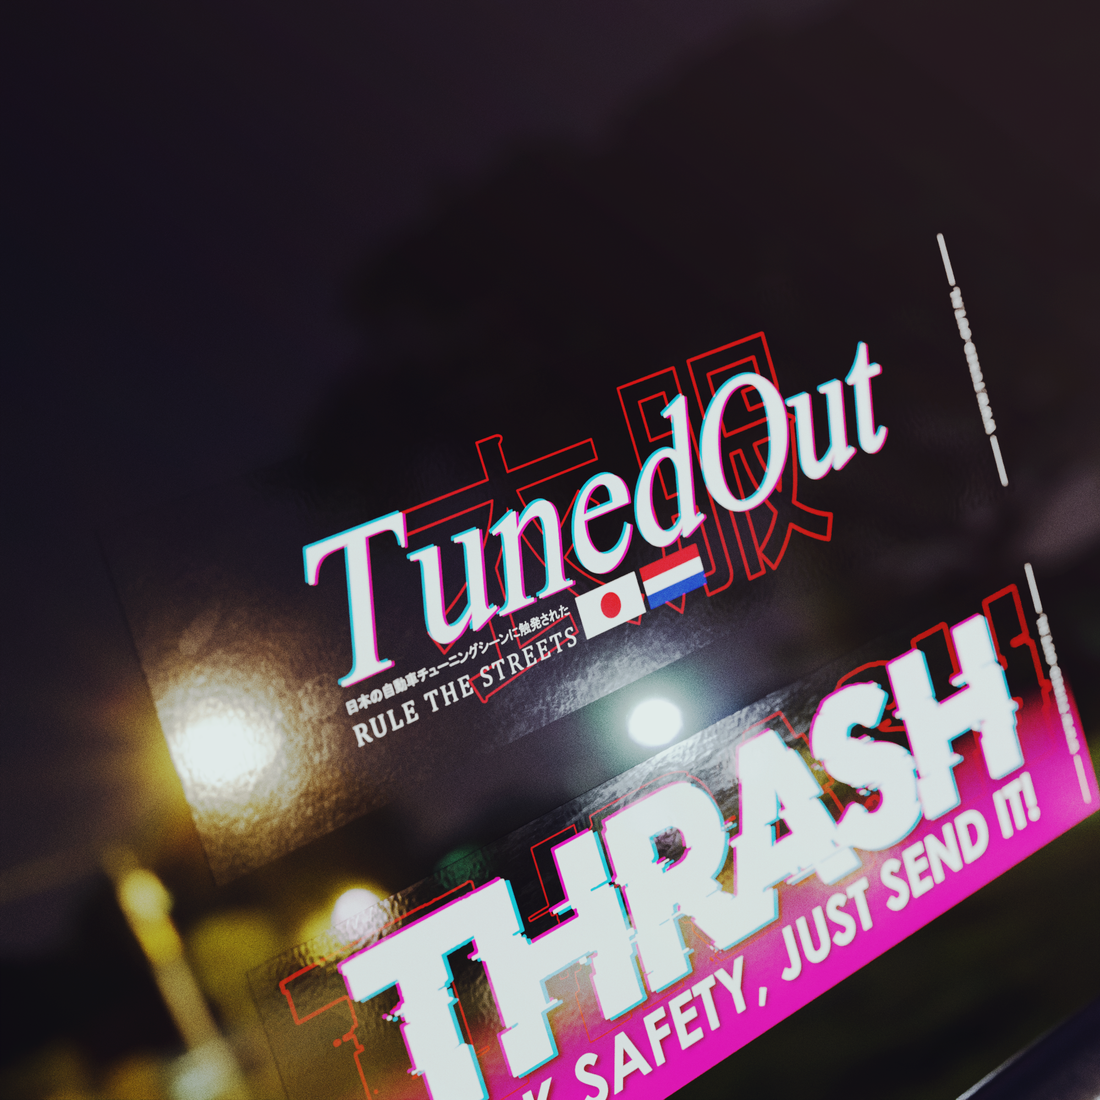 Tuned Out Rule the Streets sticker